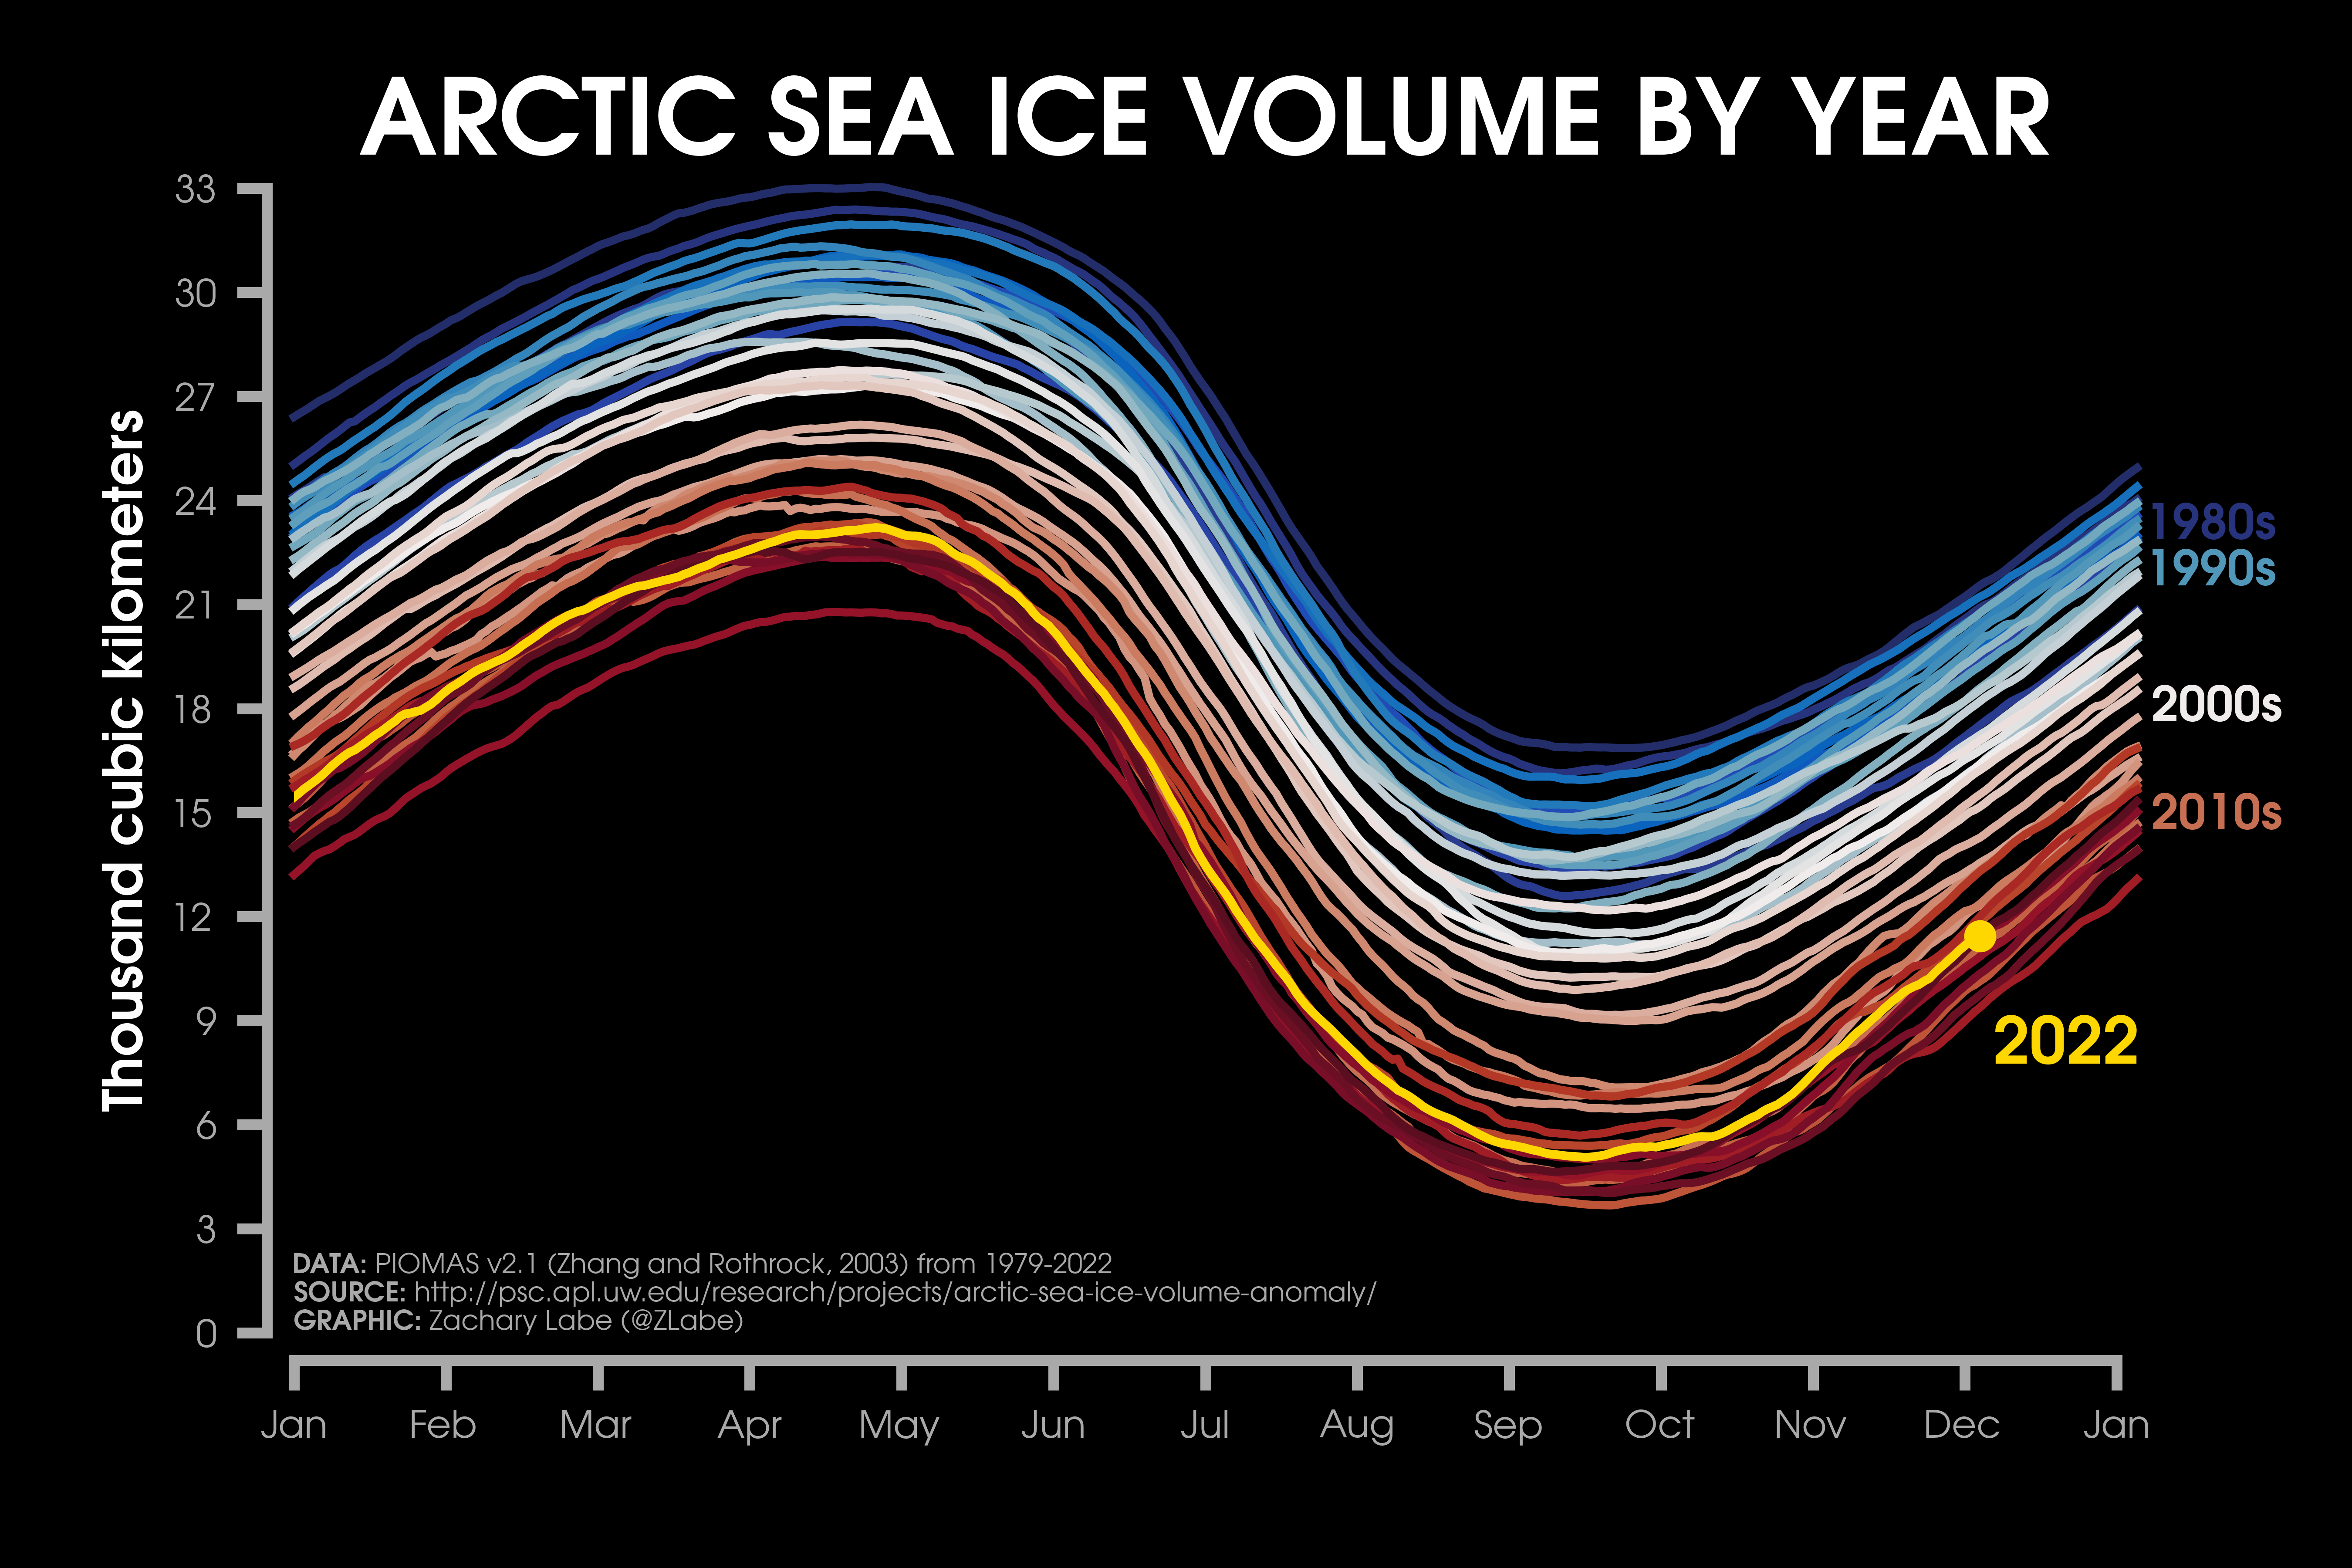 Daily Arctic sea ice volume from PIOMAS for each year from January 1, 1979 to November 30, 2022 using shades of blue to red in sequential order for every line. The decadal averages are annotated on the right side. (contributed by Z. Labe)